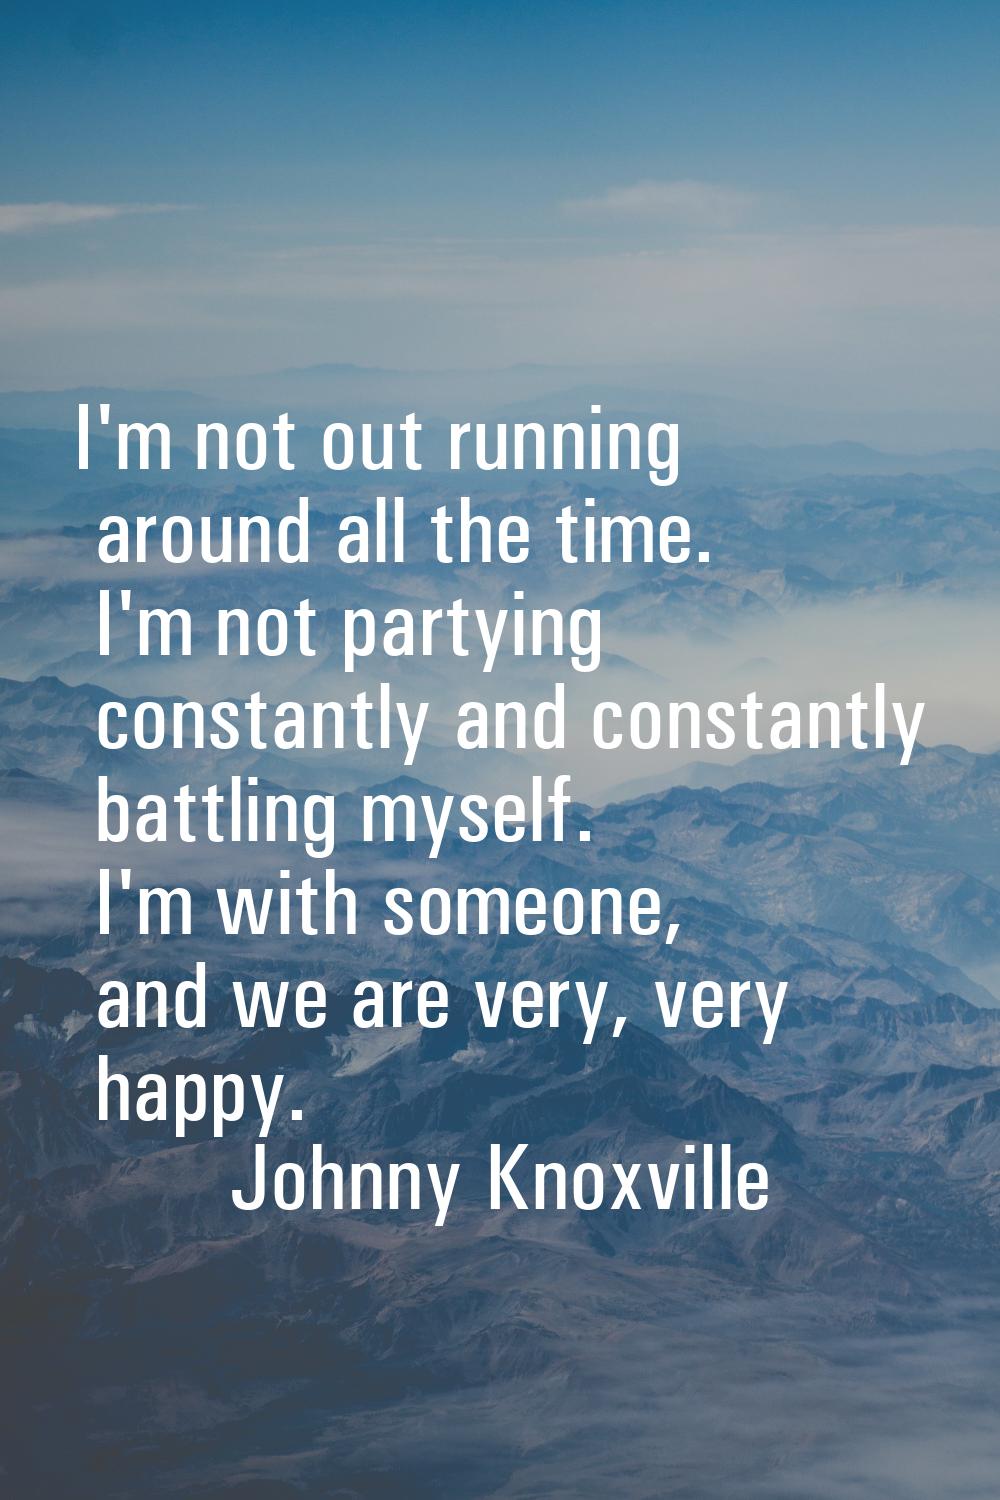 I'm not out running around all the time. I'm not partying constantly and constantly battling myself